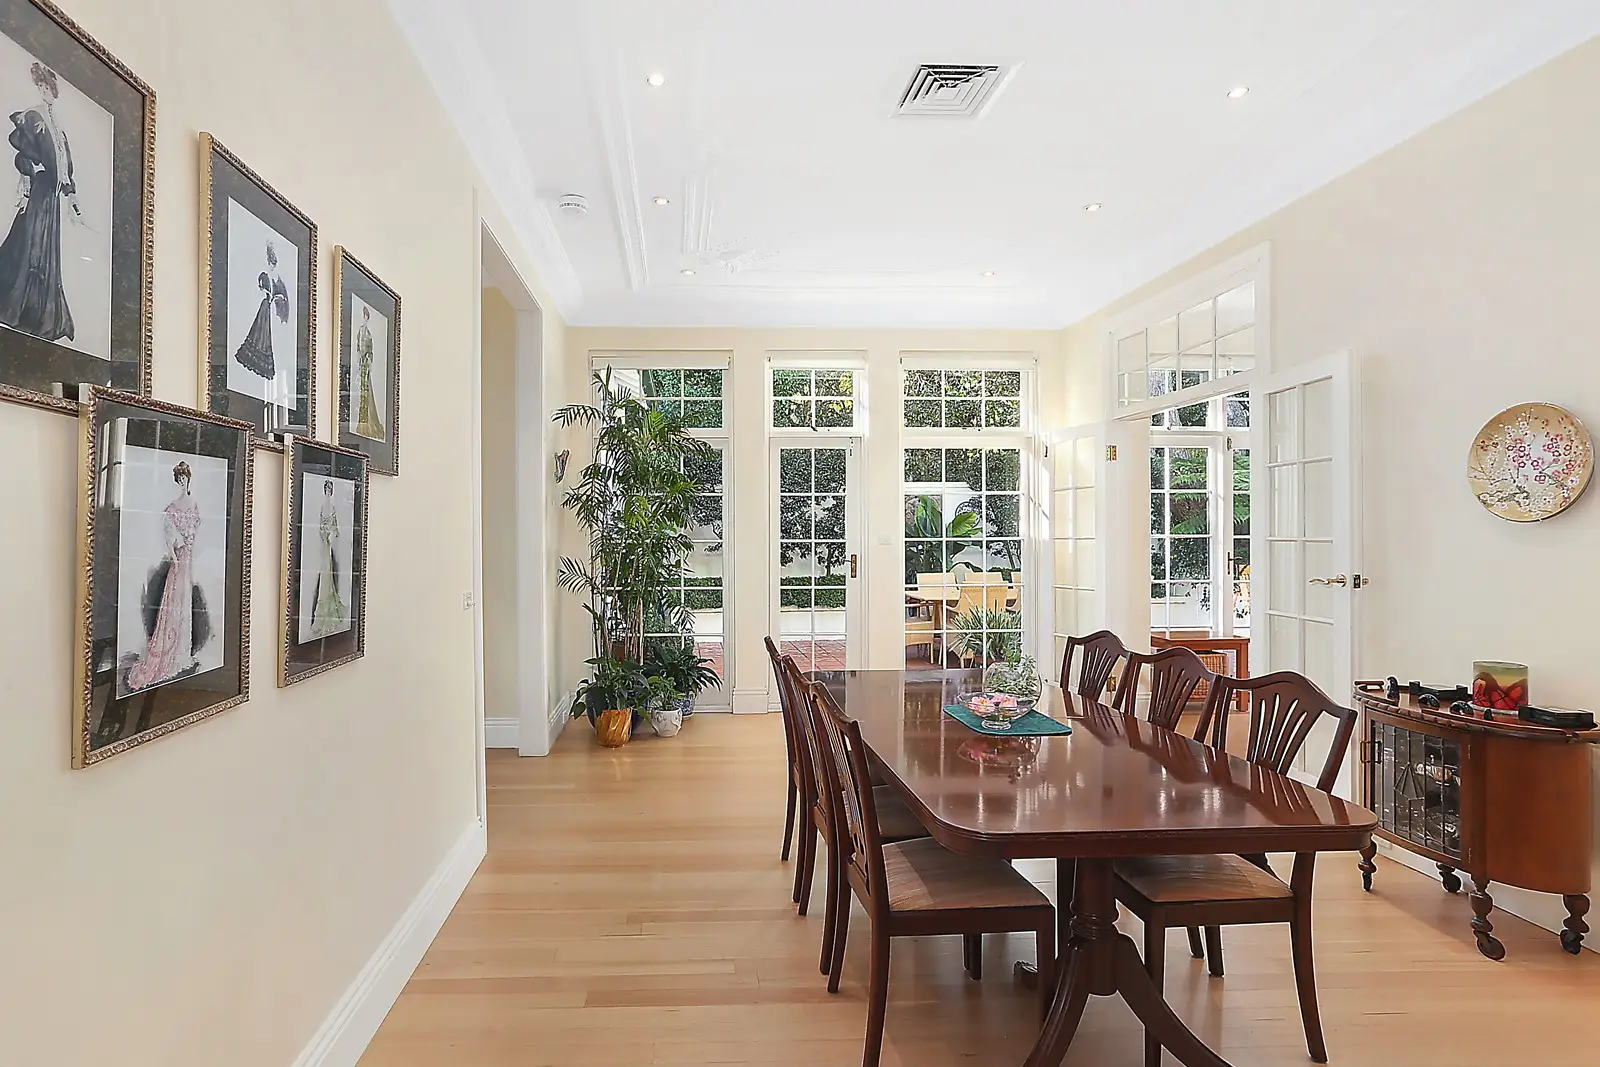 Photo #3: 6 Holland Road, Bellevue Hill - Sold by Sydney Sotheby's International Realty